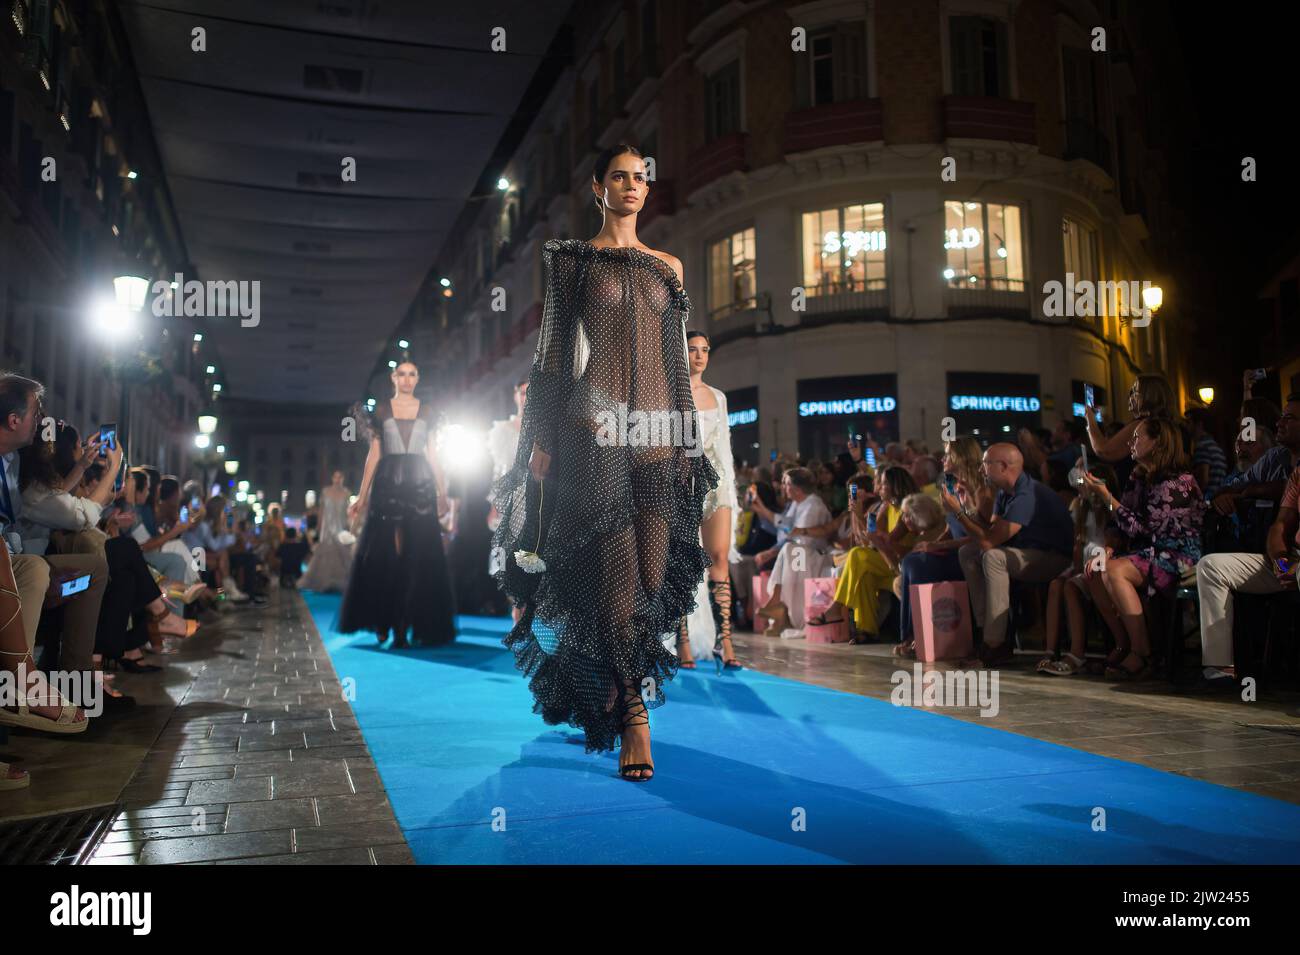 Malaga, Spain. 02nd Sep, 2022. A model presents a creation of fashion designers Victorio & Lucchino as she takes part in the 'Larios Malaga Fashion Week Catwalk' at Marques de Larios street. For two days, Malaga city welcomes the XI edition of Larios fashion catwalk, where fashion firms will walk through it main street with more than 300 metres. In this edition fashion designer Agatha Ruiz de la Prada and fashion designers Victorio & Lucchino will be the main guests. Credit: SOPA Images Limited/Alamy Live News Stock Photo